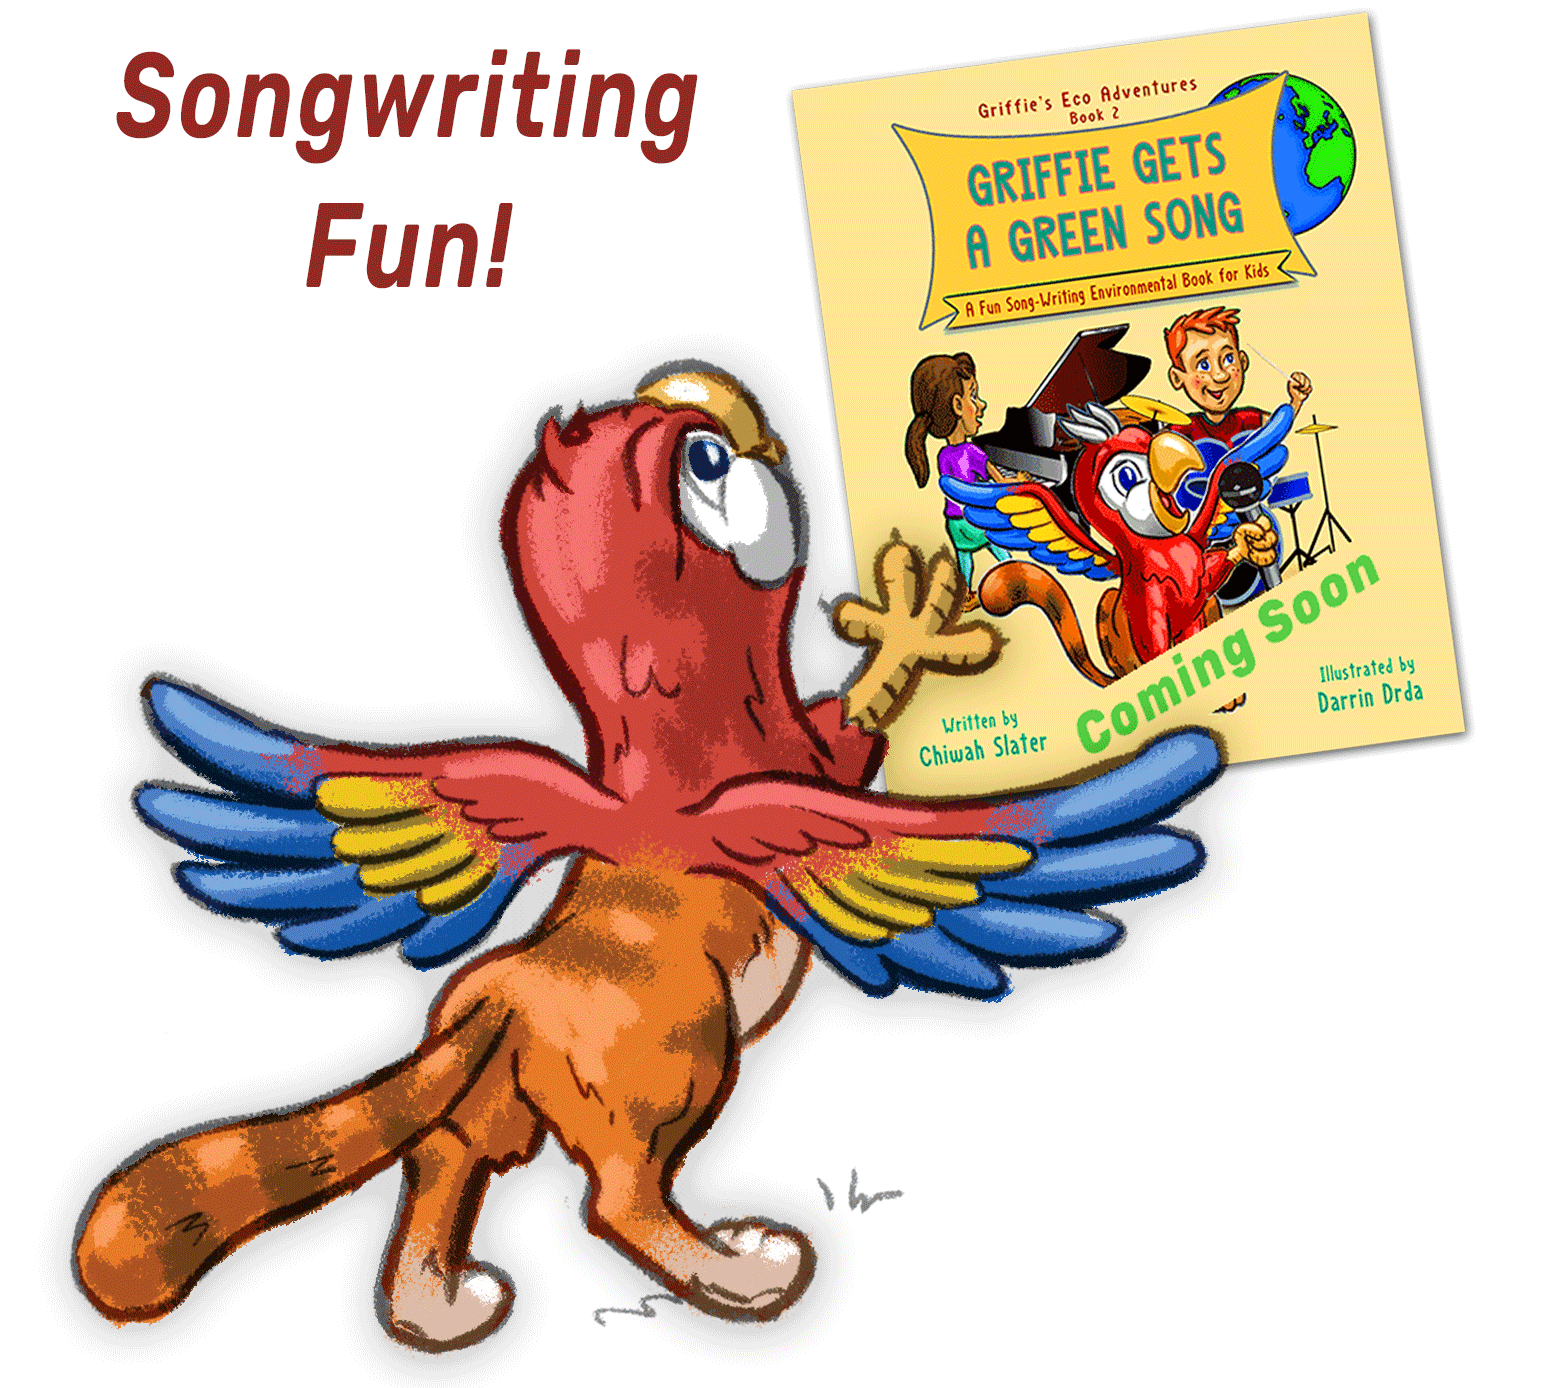 Eco Storybook: Griffie the 21st-Century Griffin, a red striped cat with the head and wings of a red parrot and the most alluring of mythological heroes, looks at his second eco storybook, "Griffie Gets a Green Song." Top left are the words "Songwriting Fun!"